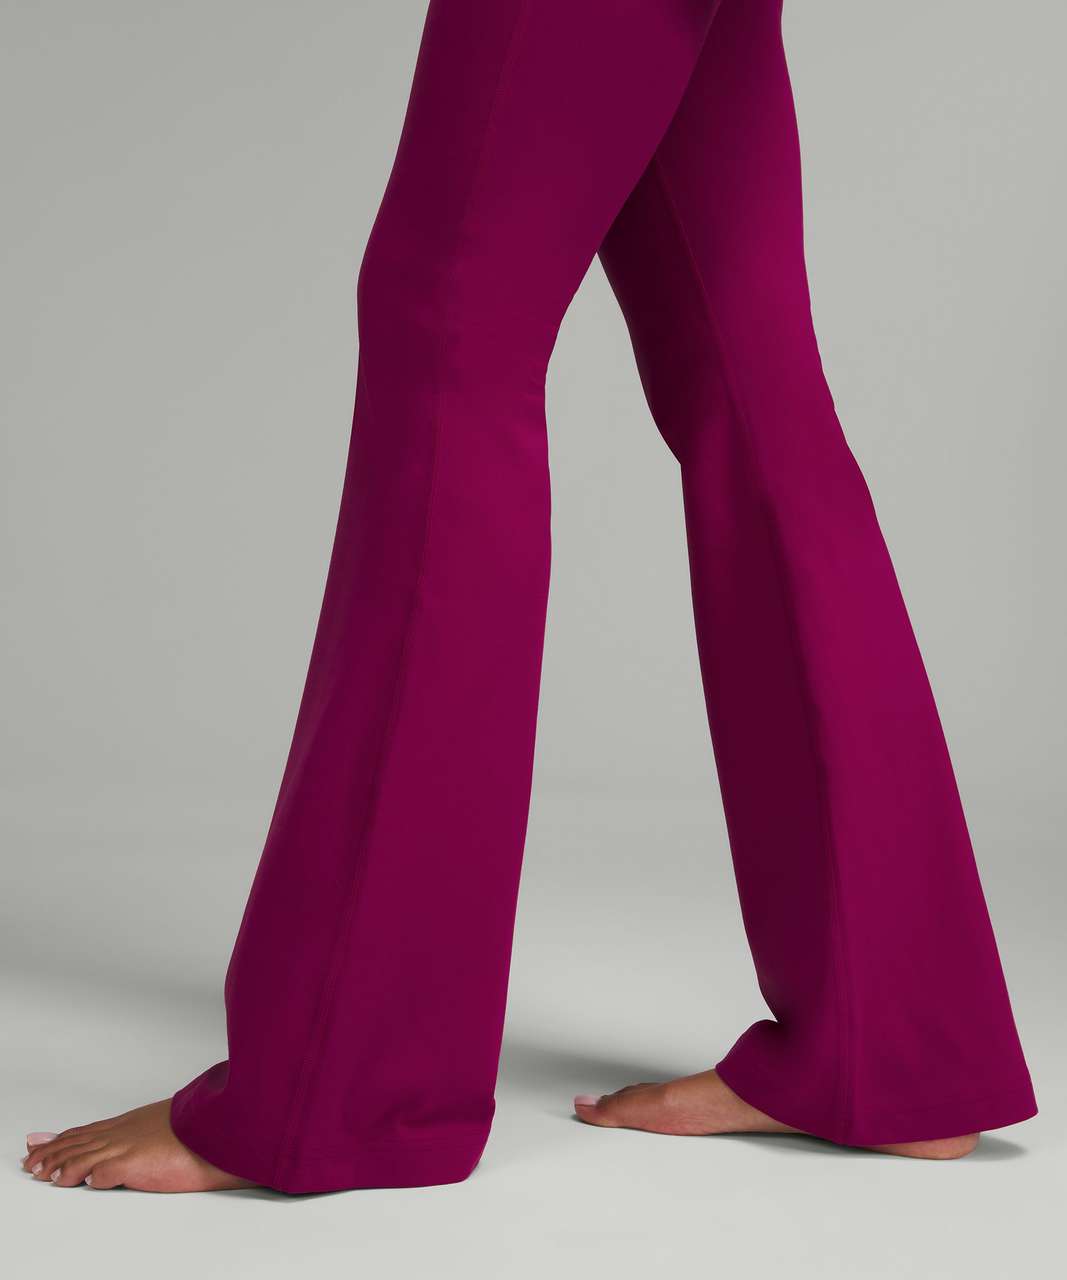 Lululemon Groove Pants Flare Super High-Rise Nulu Purple Size 4 - $85 (27%  Off Retail) - From emily